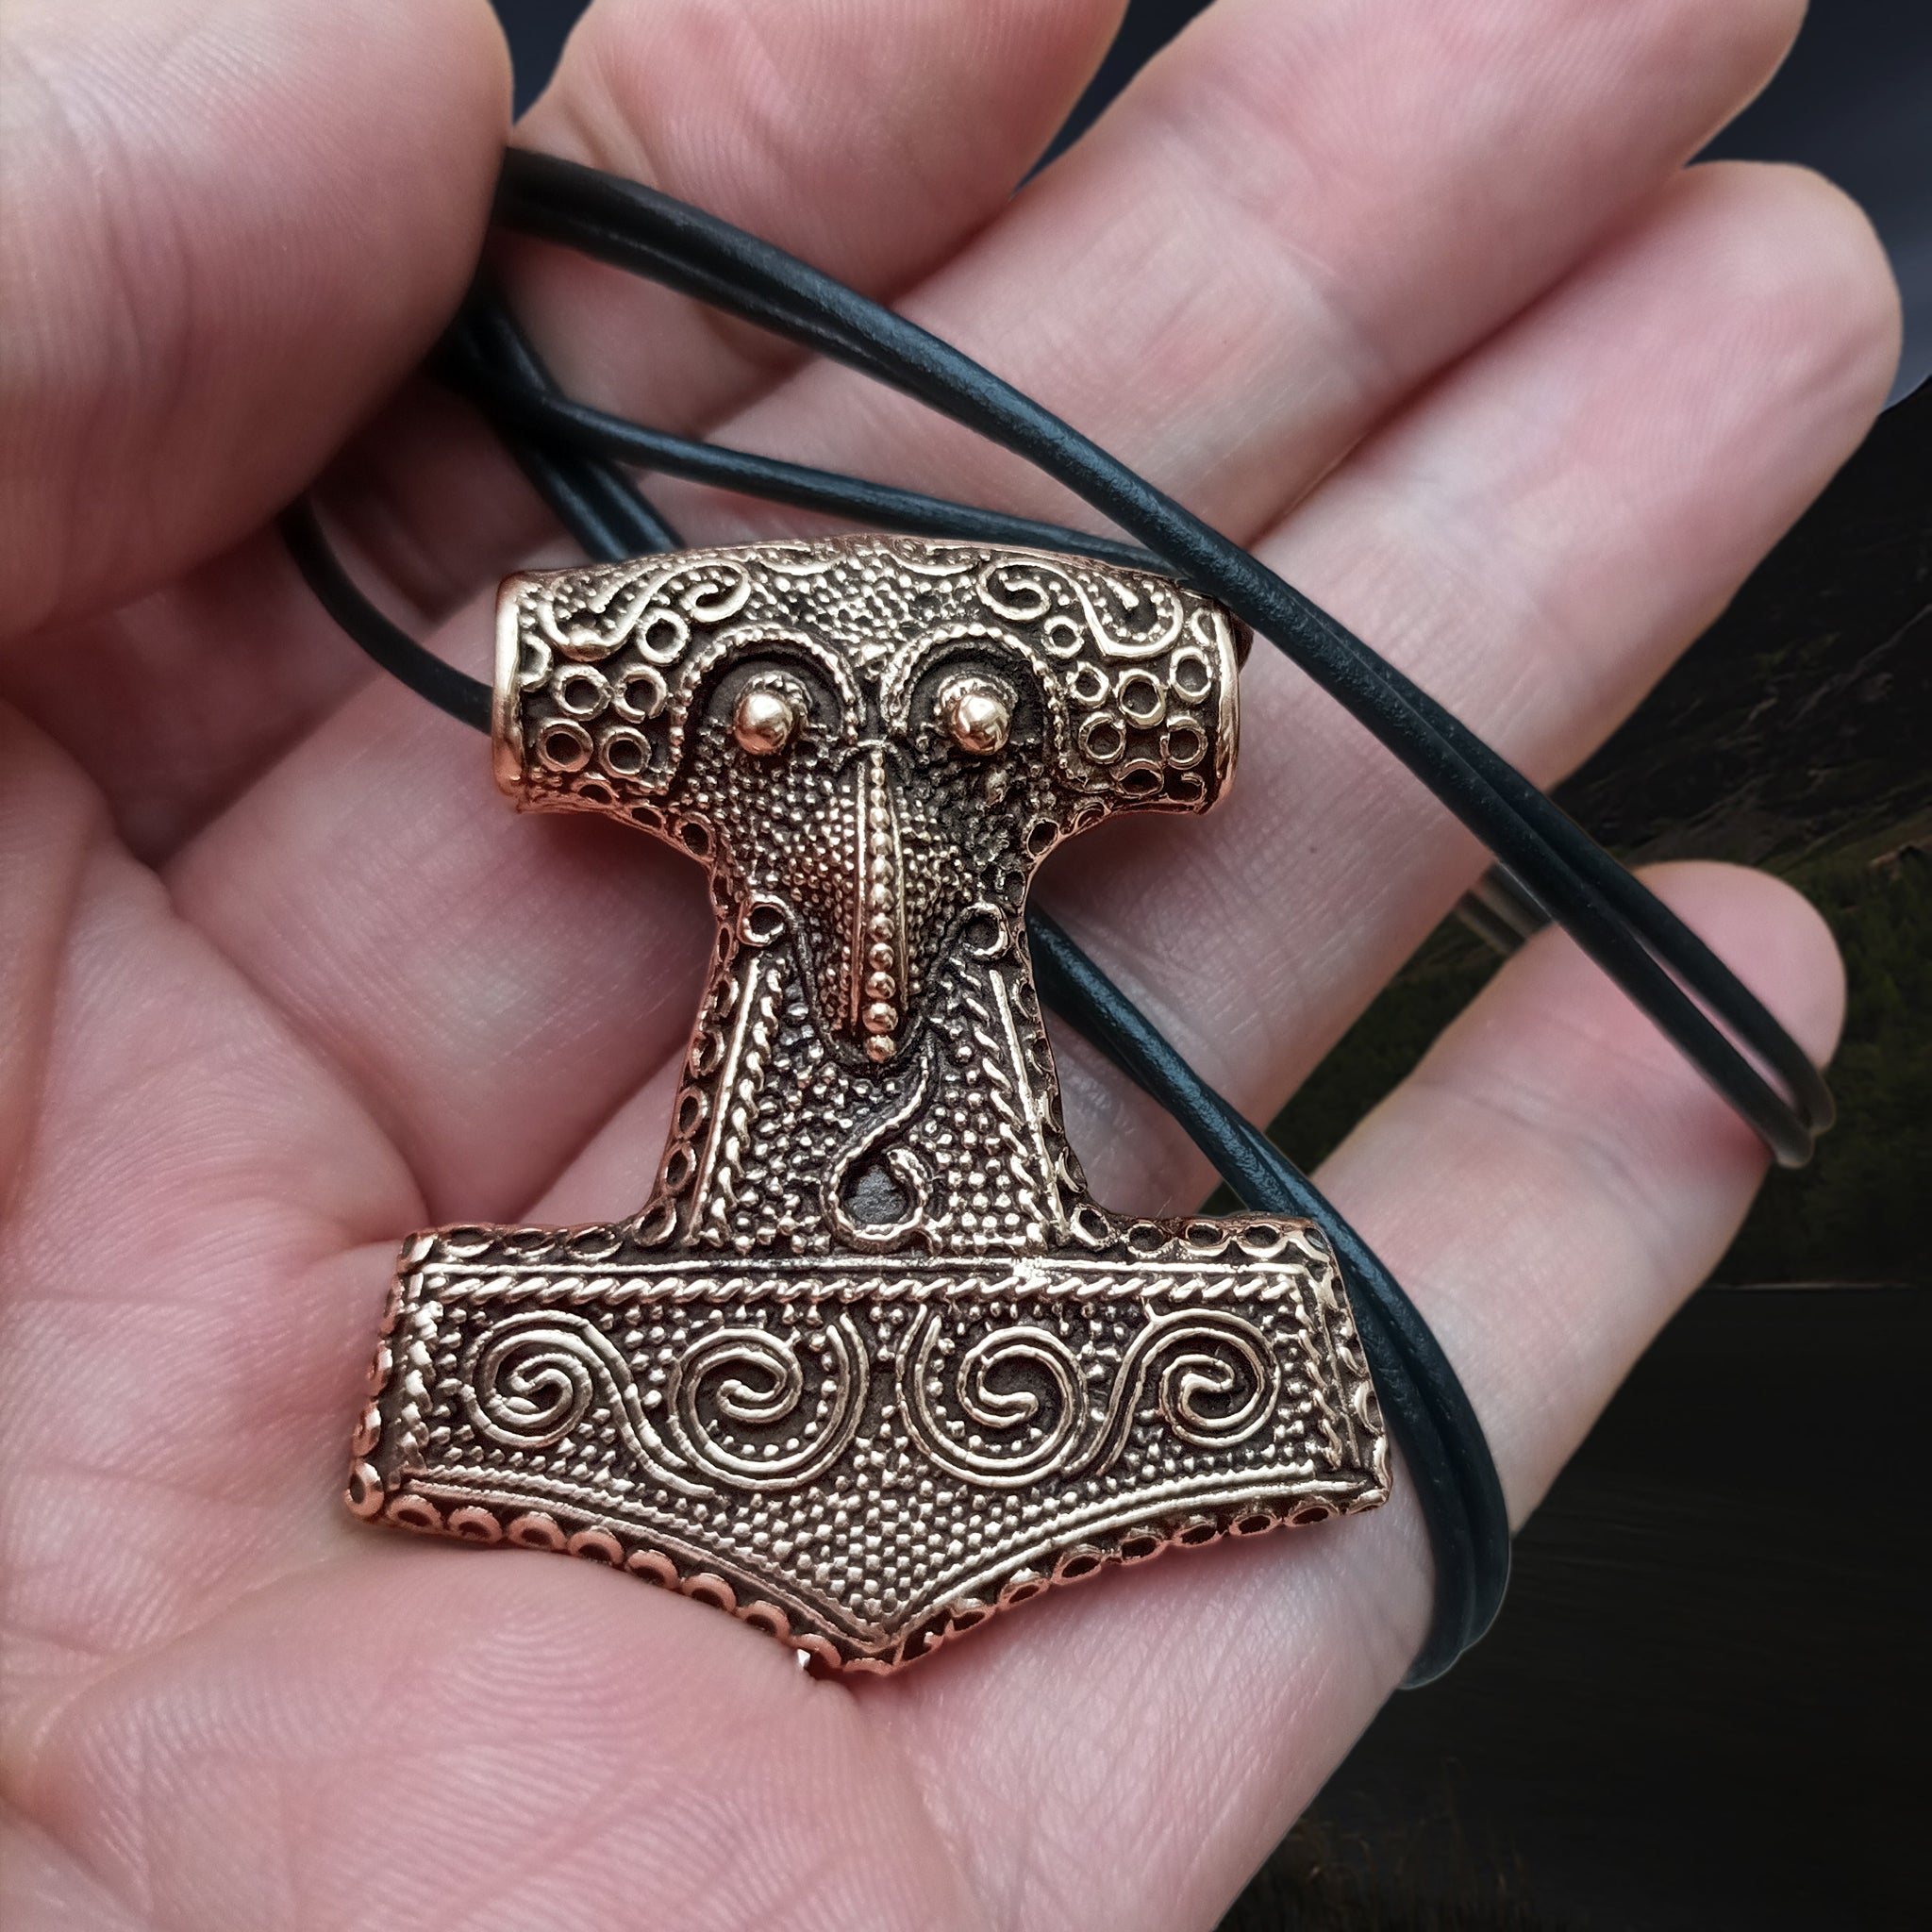 Large Bronze Skåne Thors Hammer Pendant on Thong Wrapped Around Hand